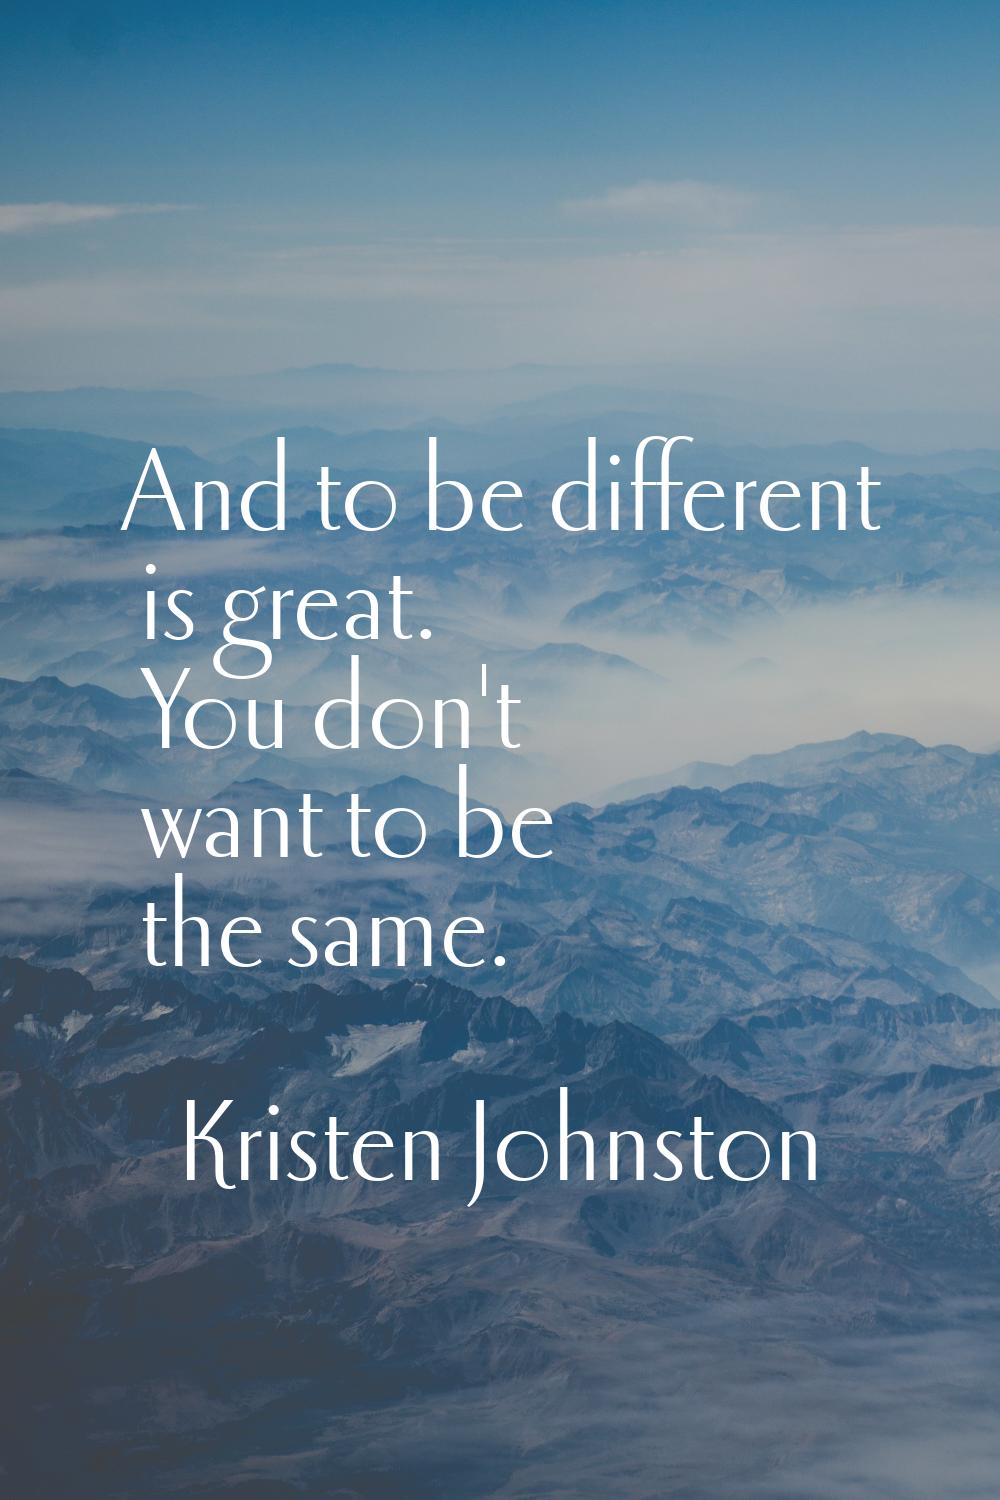 And to be different is great. You don't want to be the same.